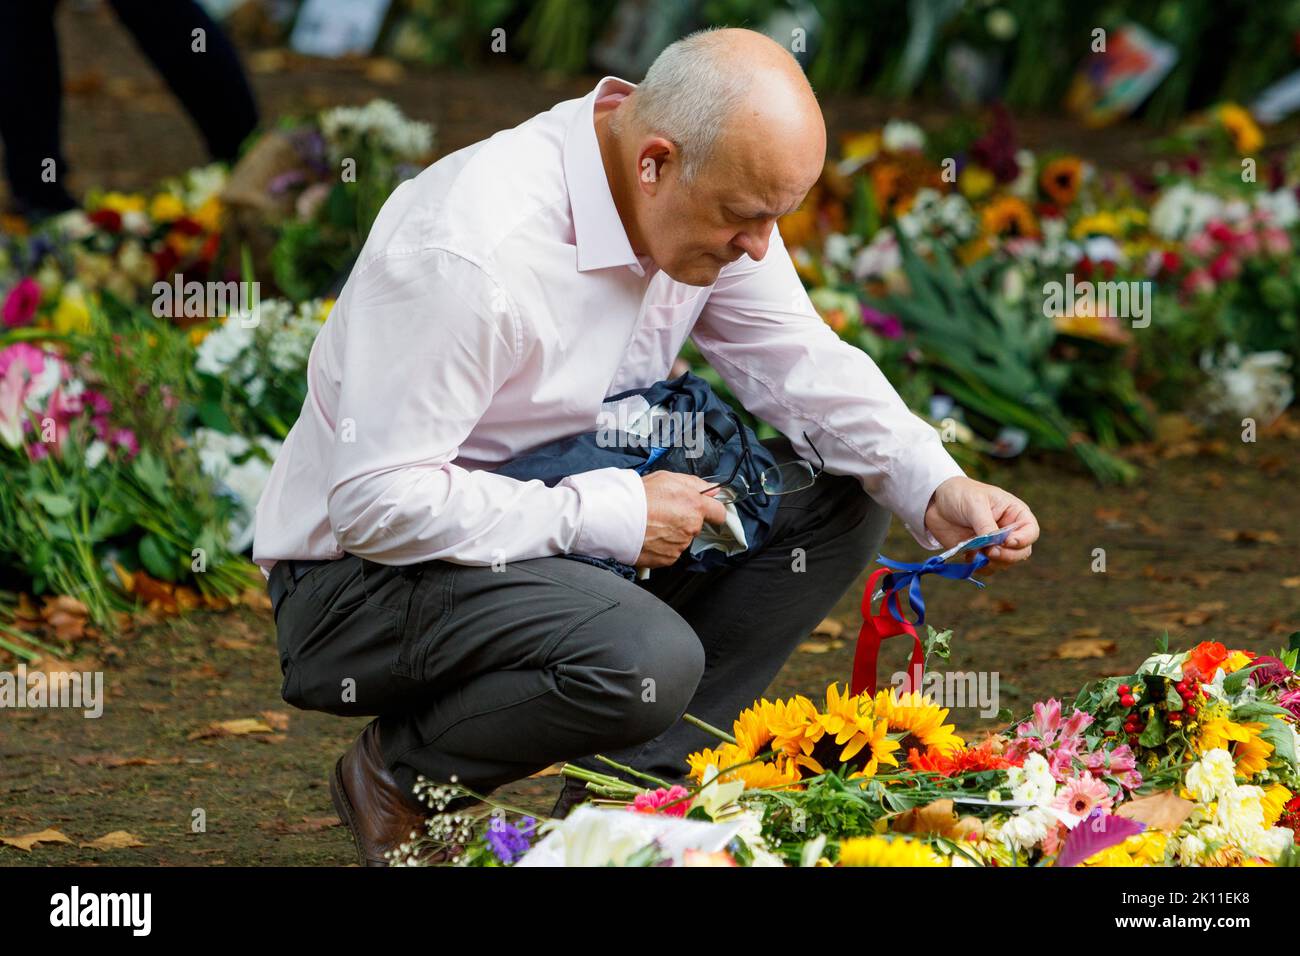 London, UK. 14th Sep, 2022. As crowds of people came to London to watch Her Majesty the Queen's coffin being transported to the Palace of Westminster, a man is pictured as he looks at the condolence cards and flowers that have been left in Green Park, London. Credit: Lynchpics/Alamy Live News Stock Photo